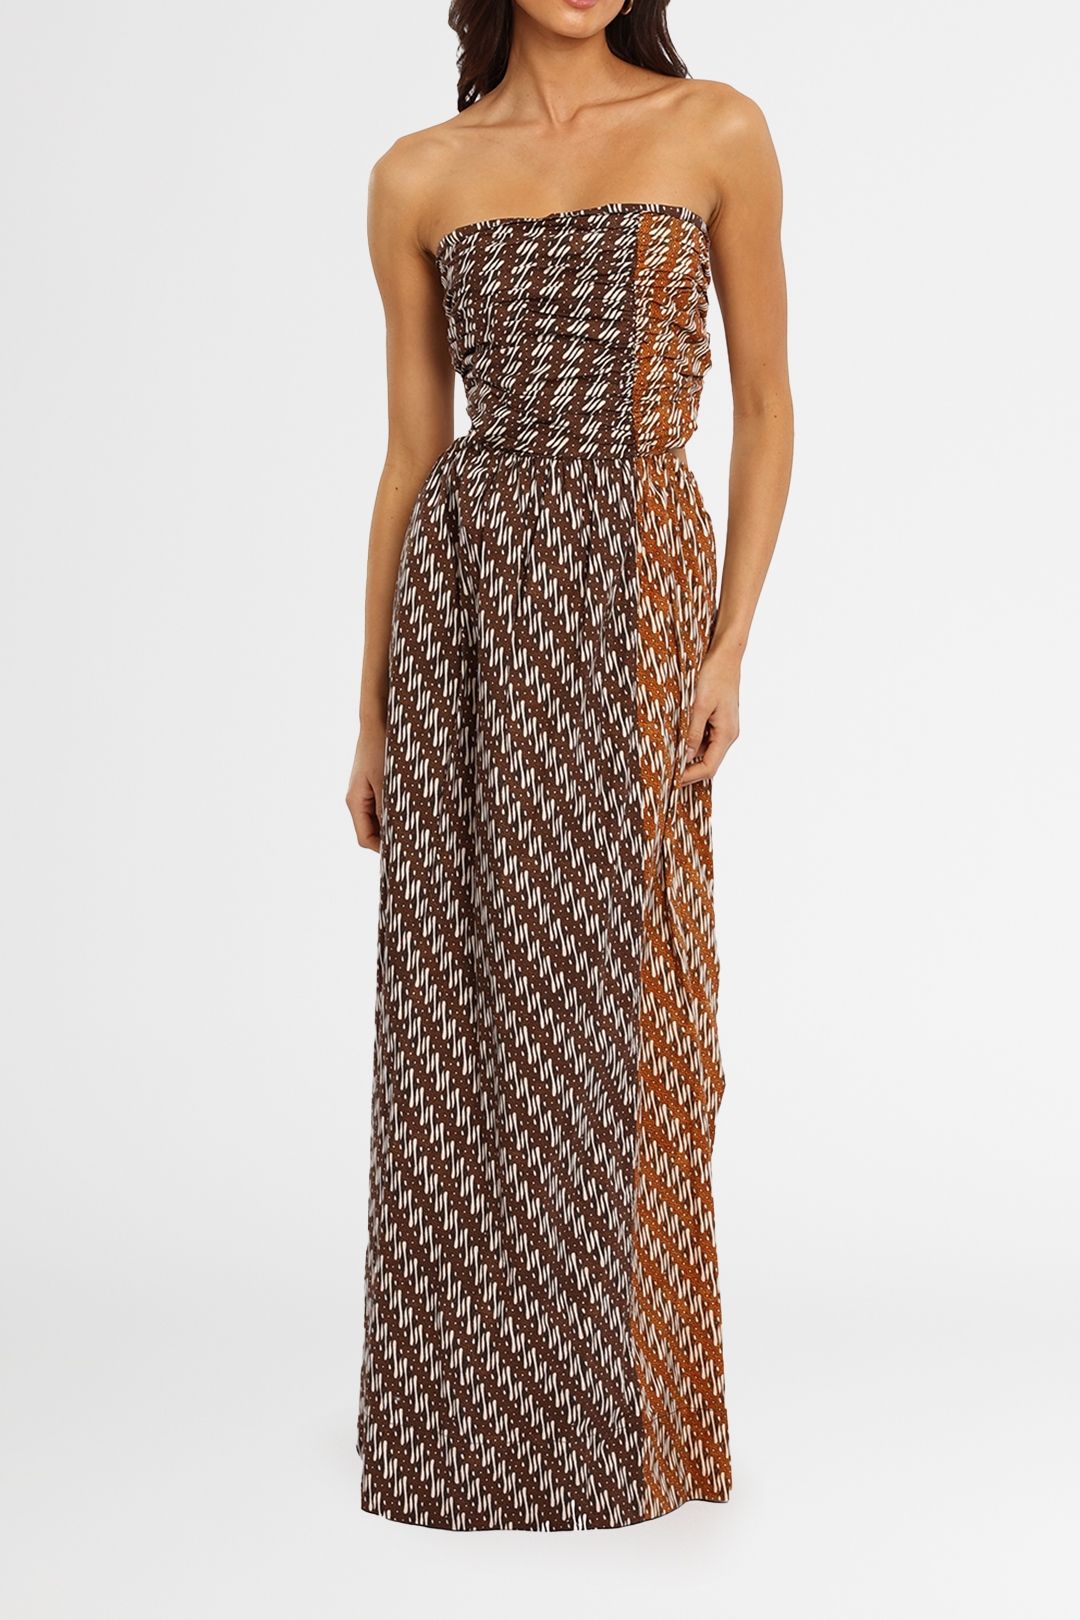 Bassike Strapless Printed Maxi abstract